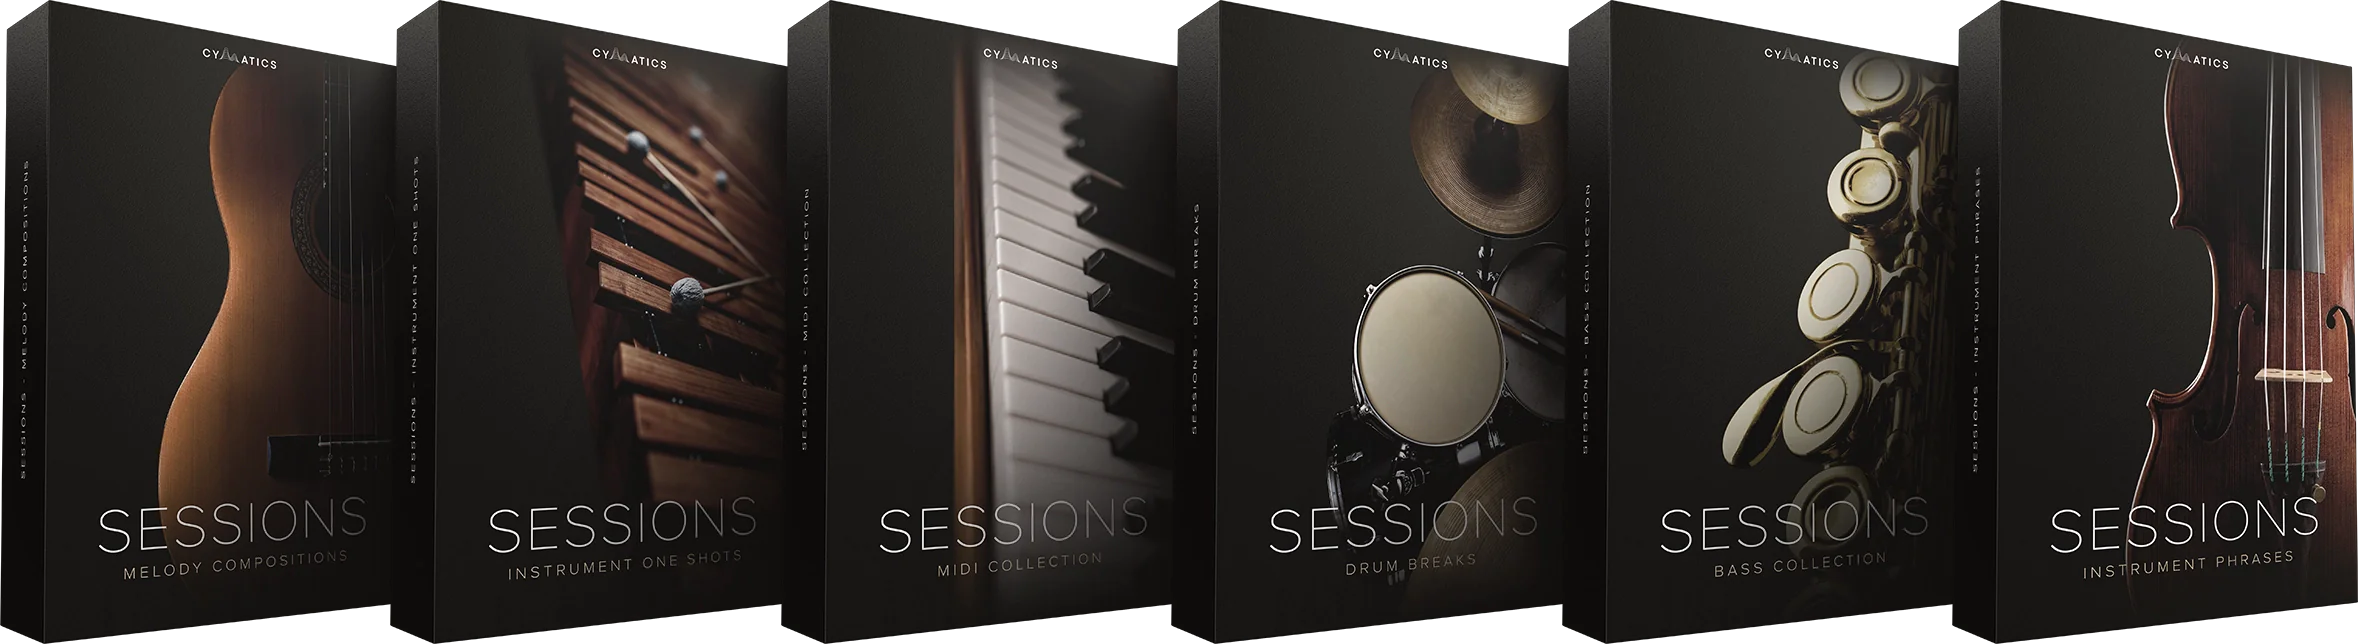 Session collection